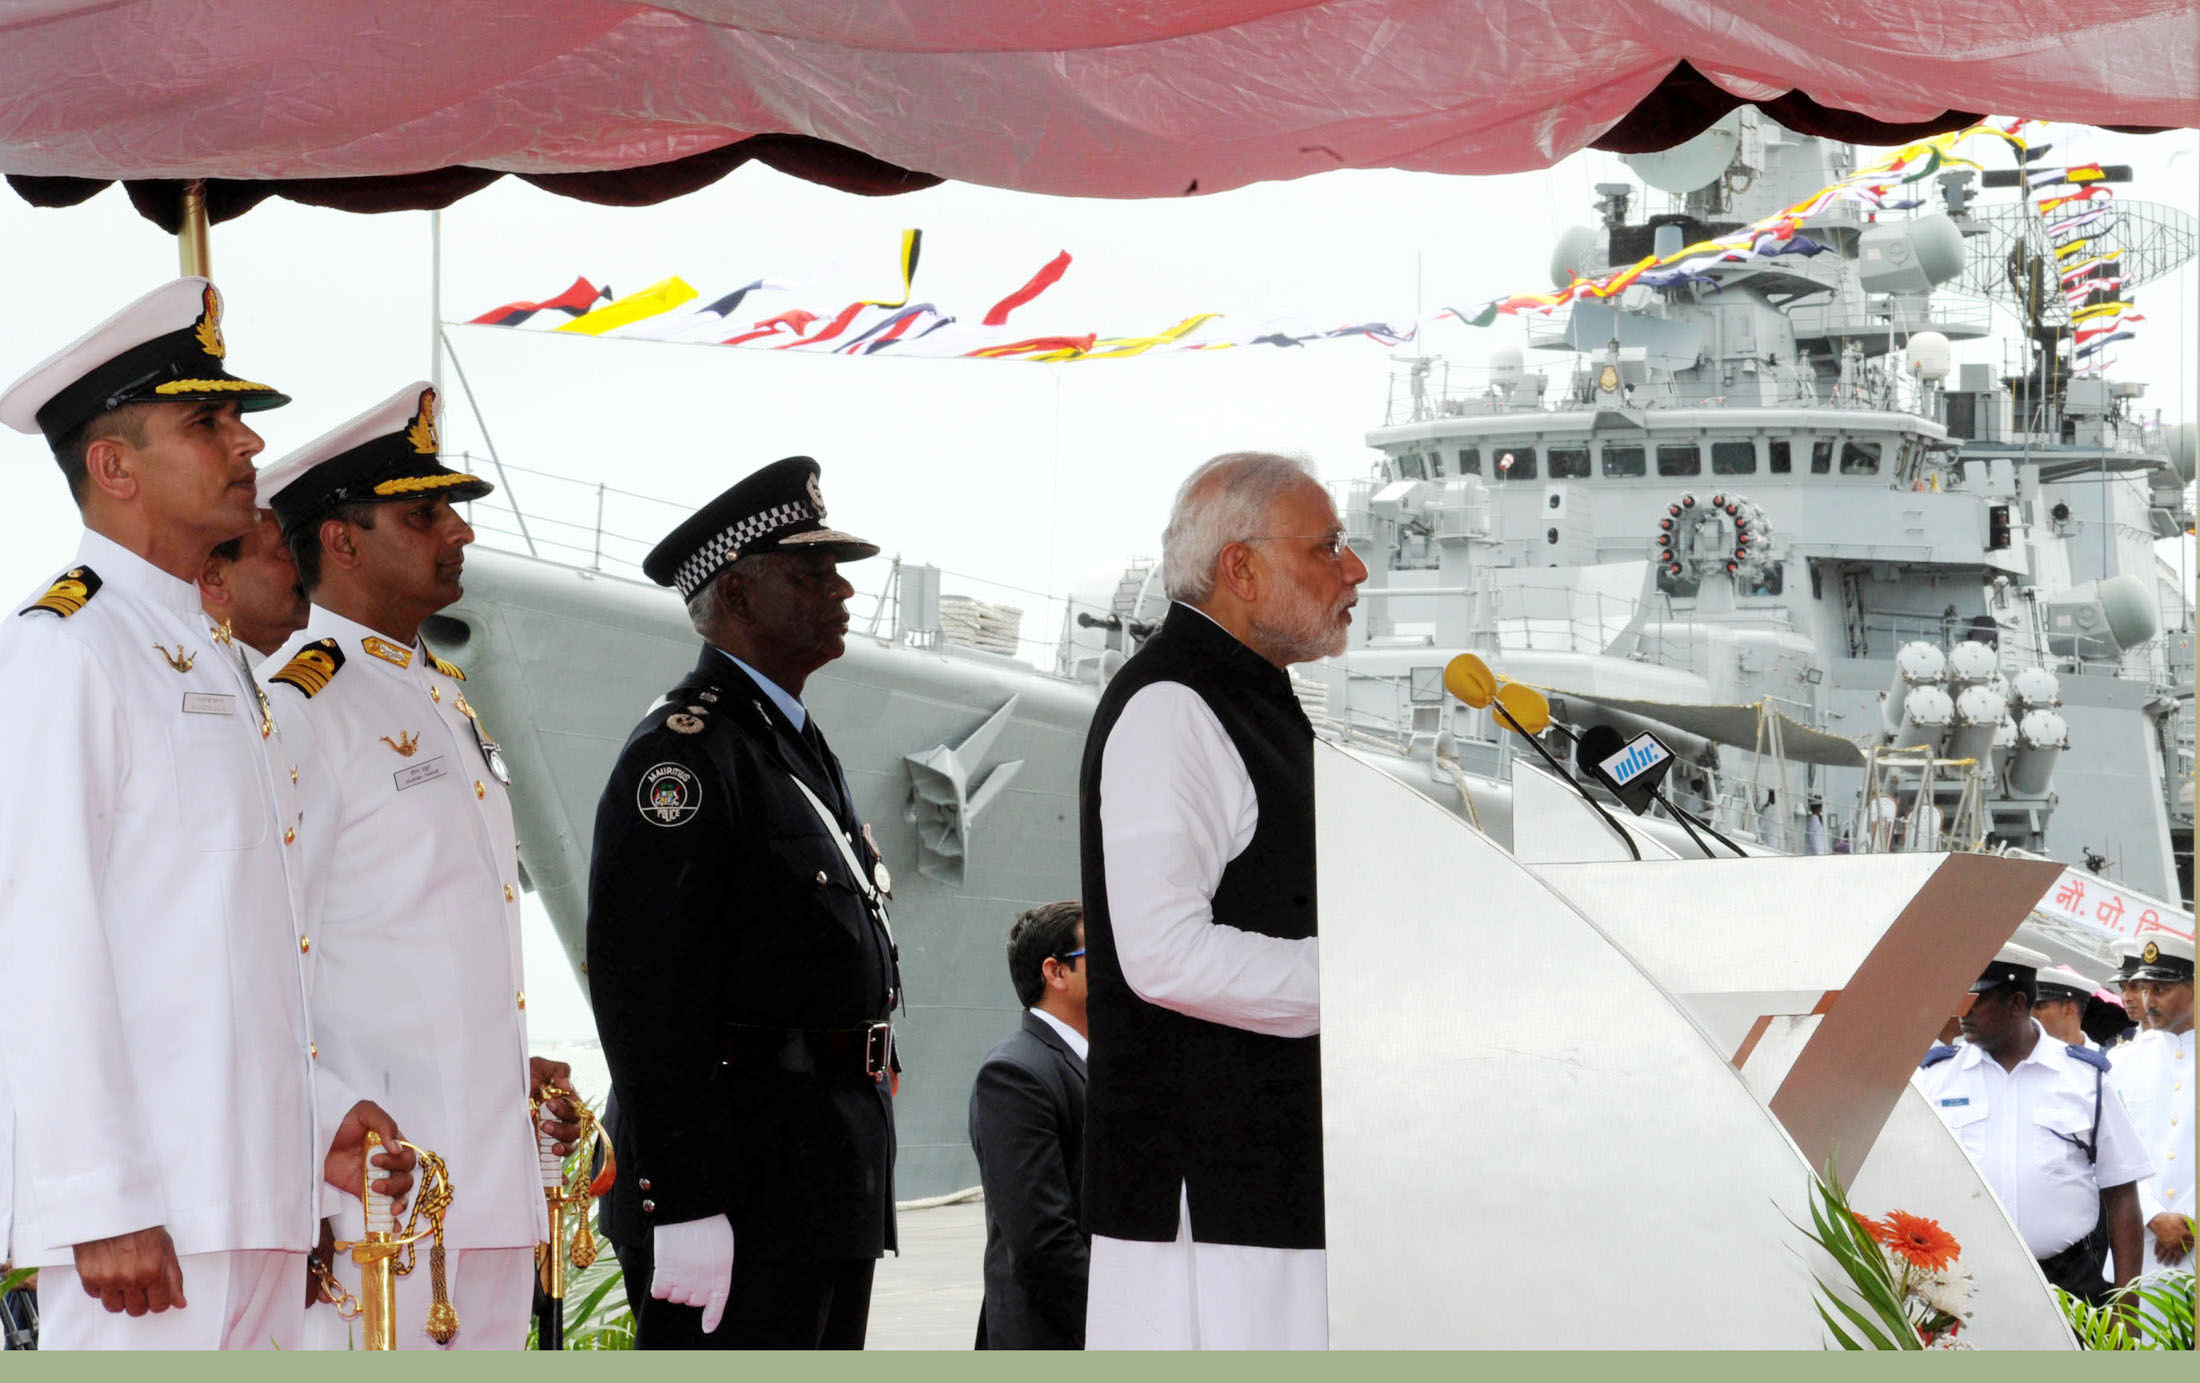 PM’s Remarks on the Commissioning of Coast Ship Barracuda